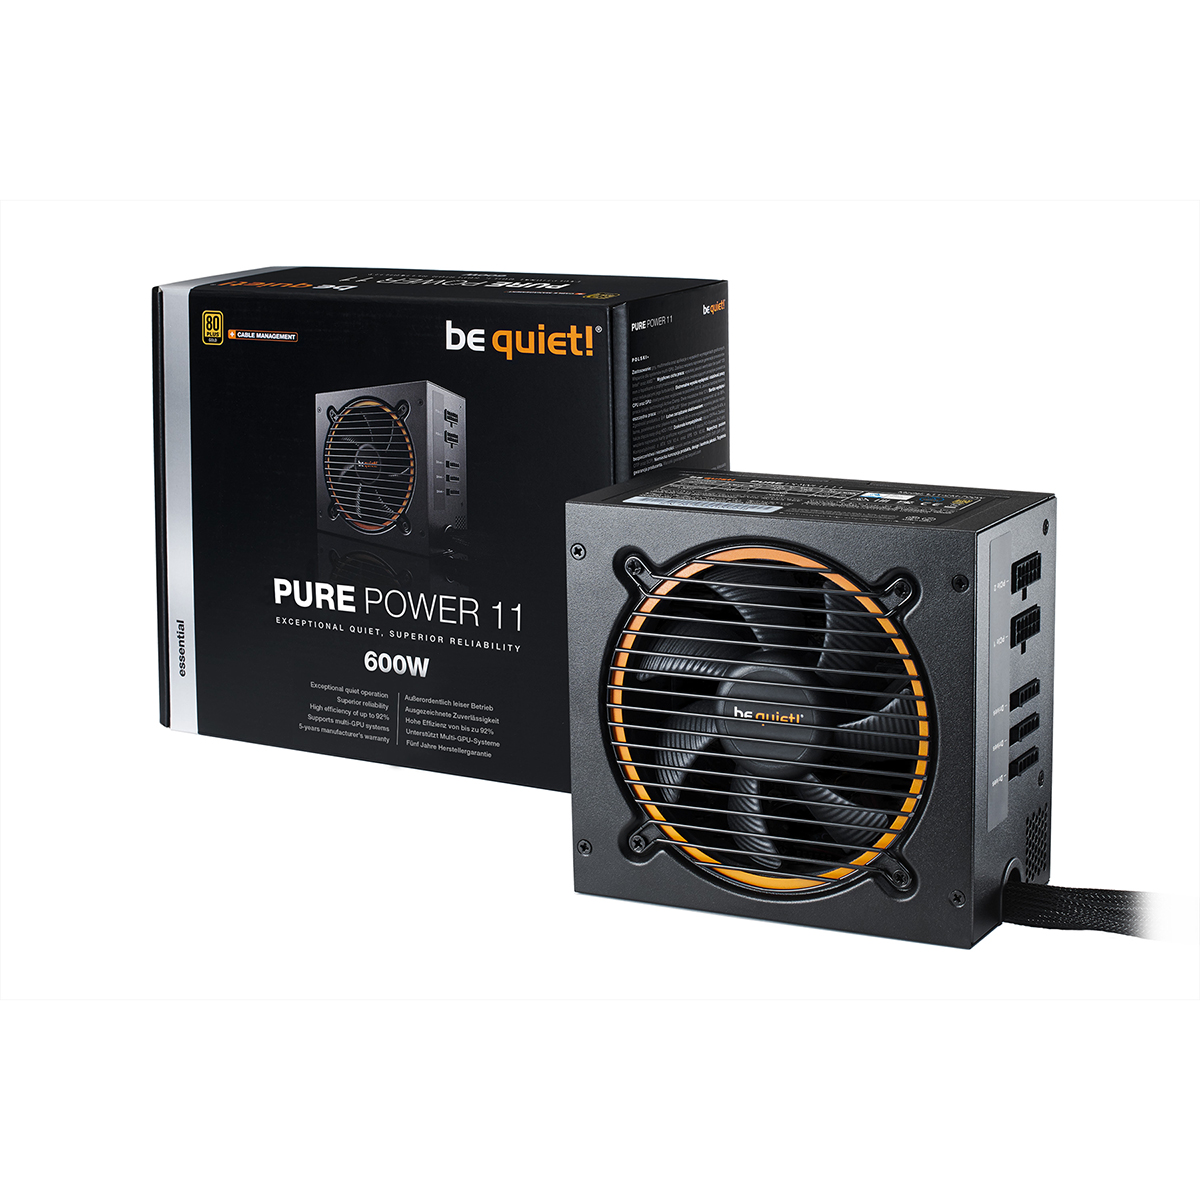 be quiet! - be quiet Pure Power 11 600W 80 Plus Gold Modular Power Supply